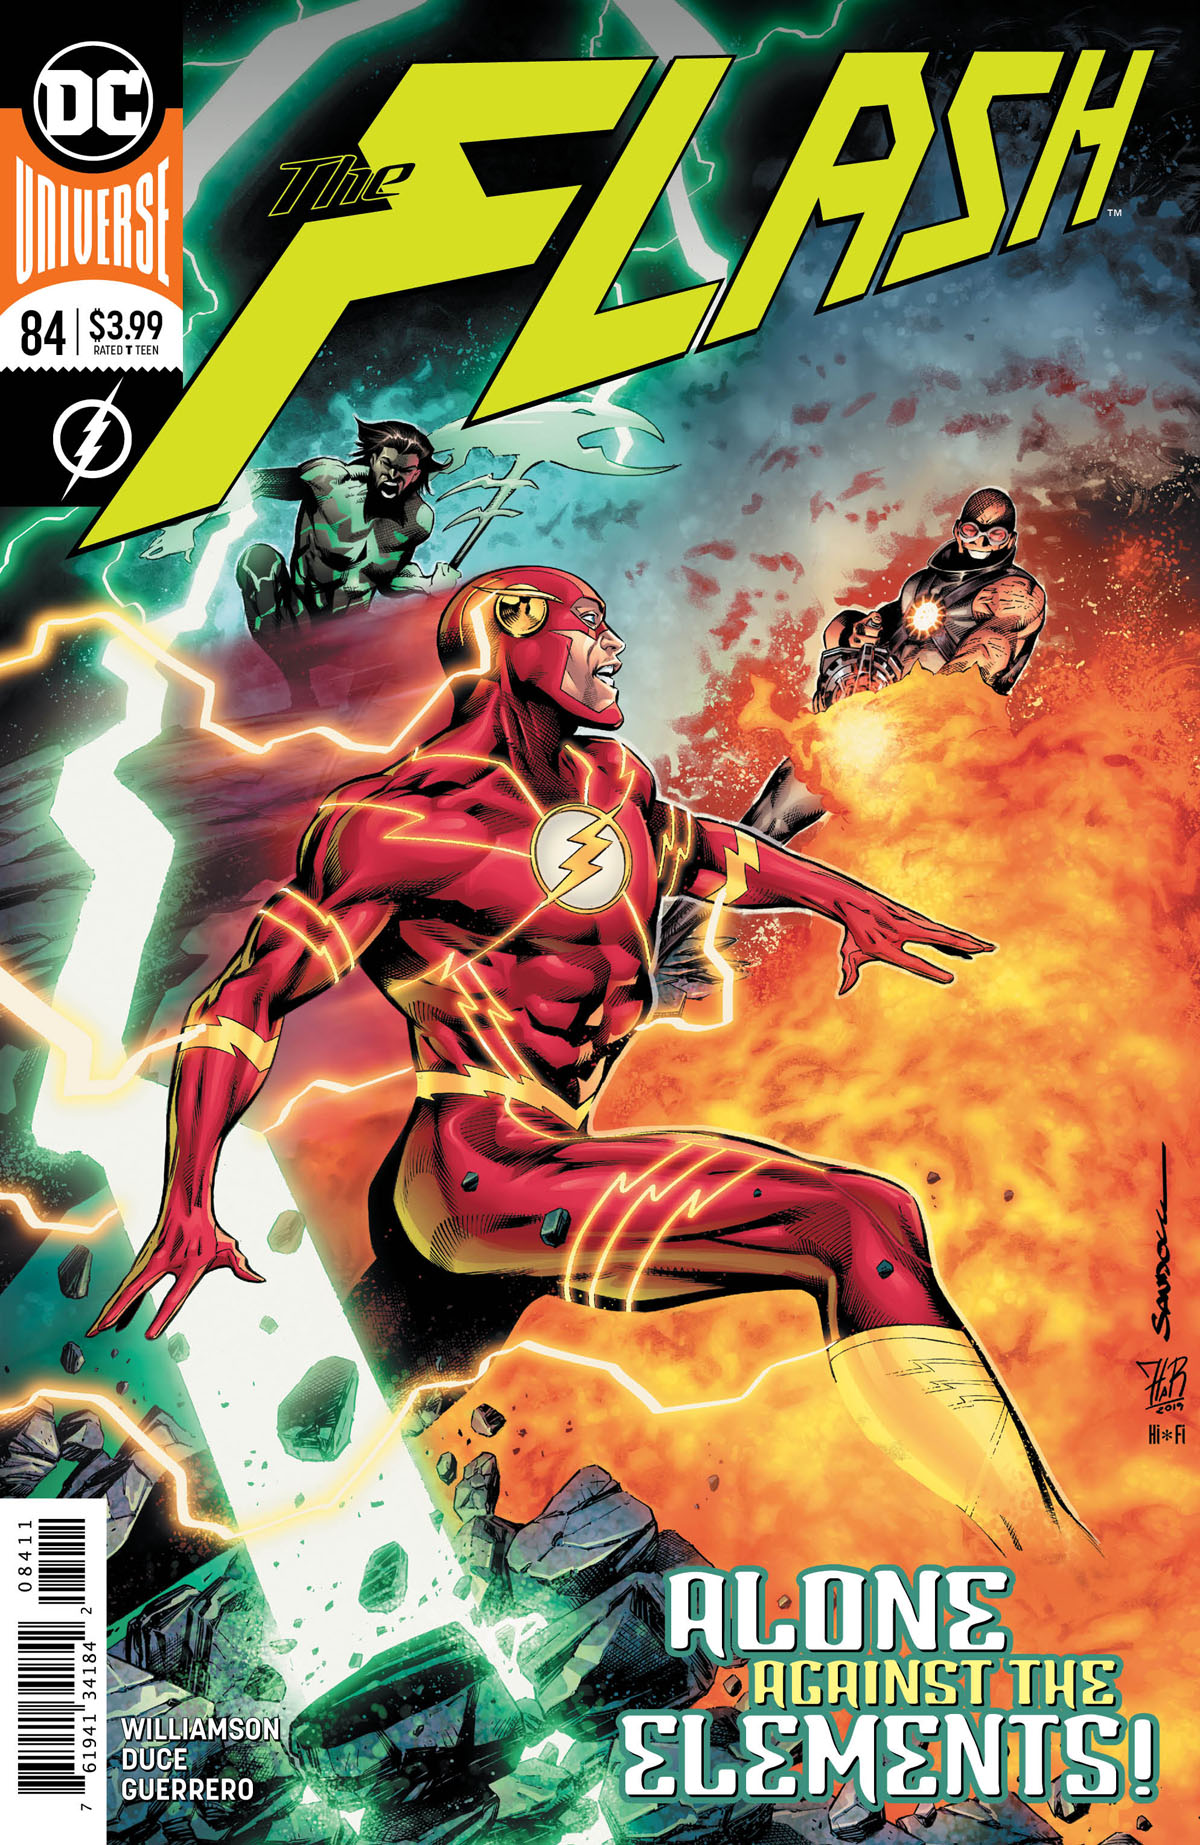 The Flash #84 cover